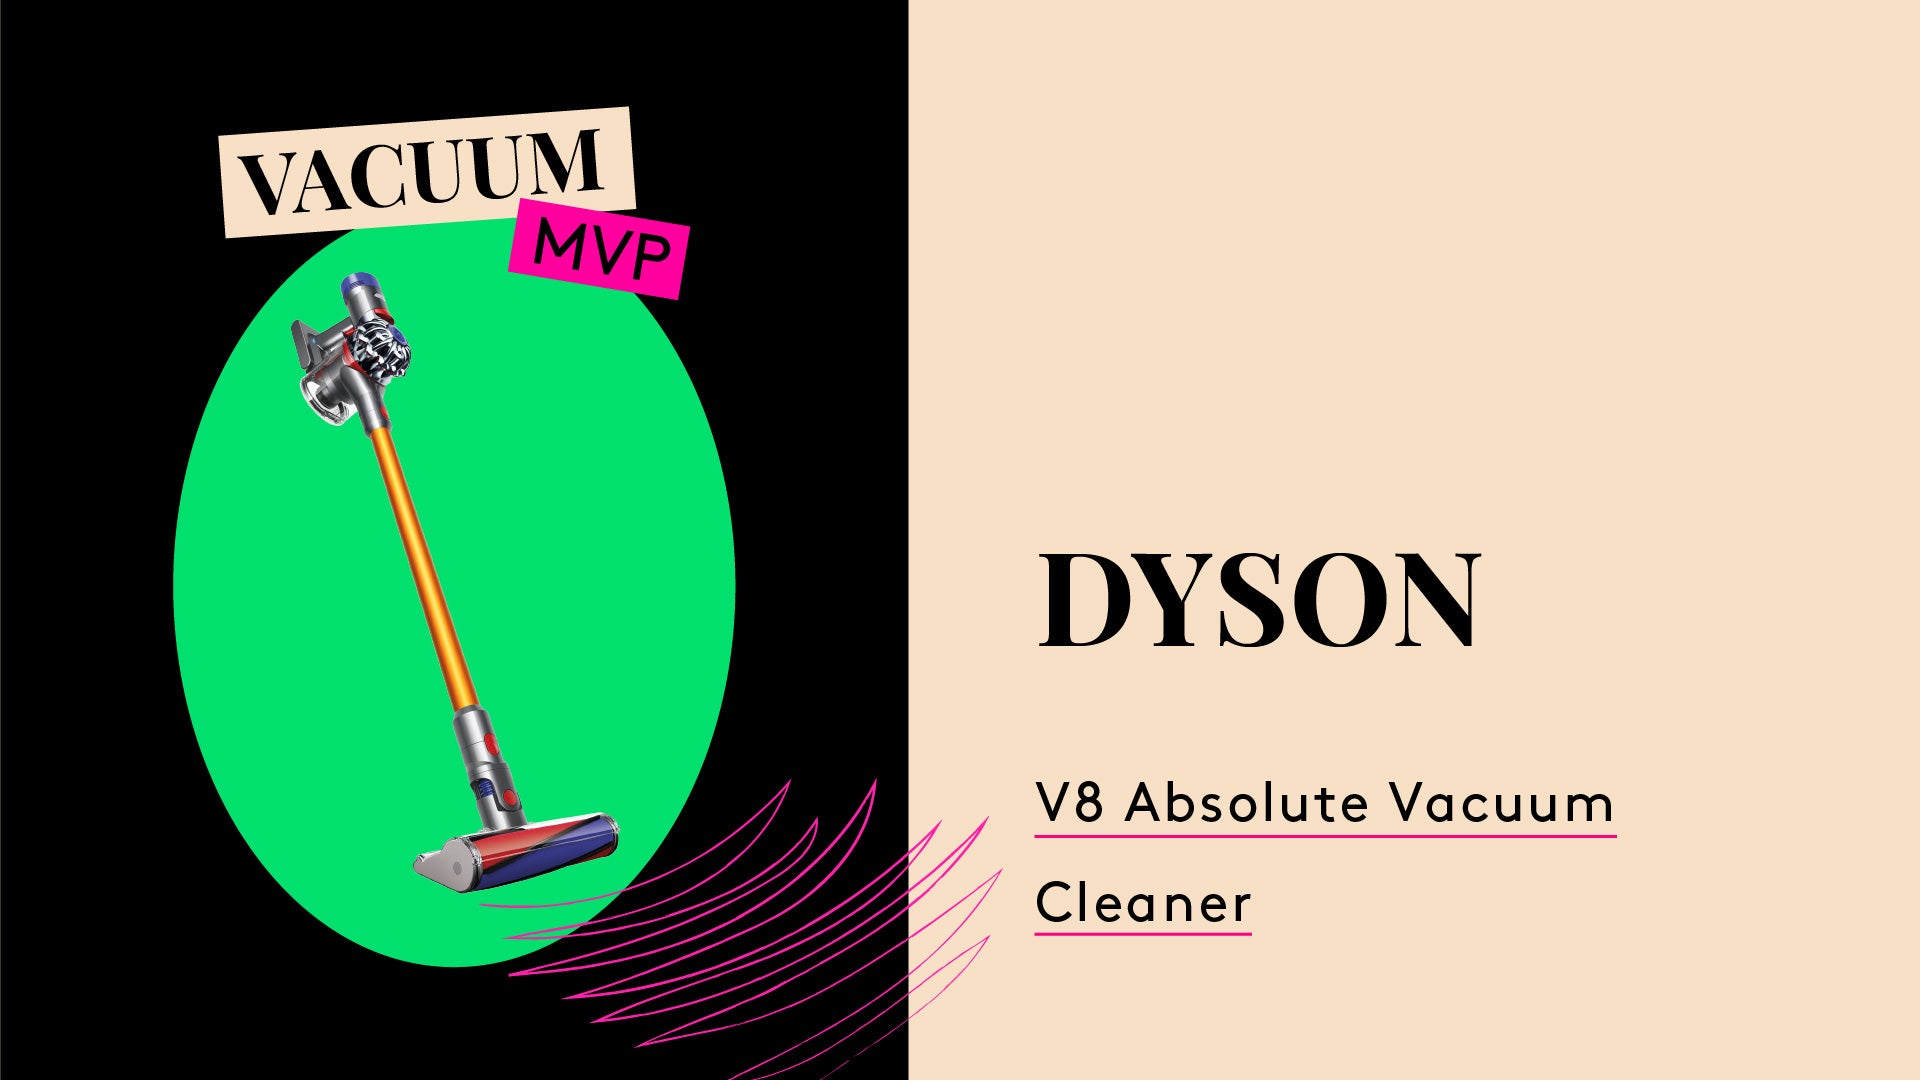 Vacuum MVP. This is a photo of the Dyson V8 Absolute Vacuum cleaner.